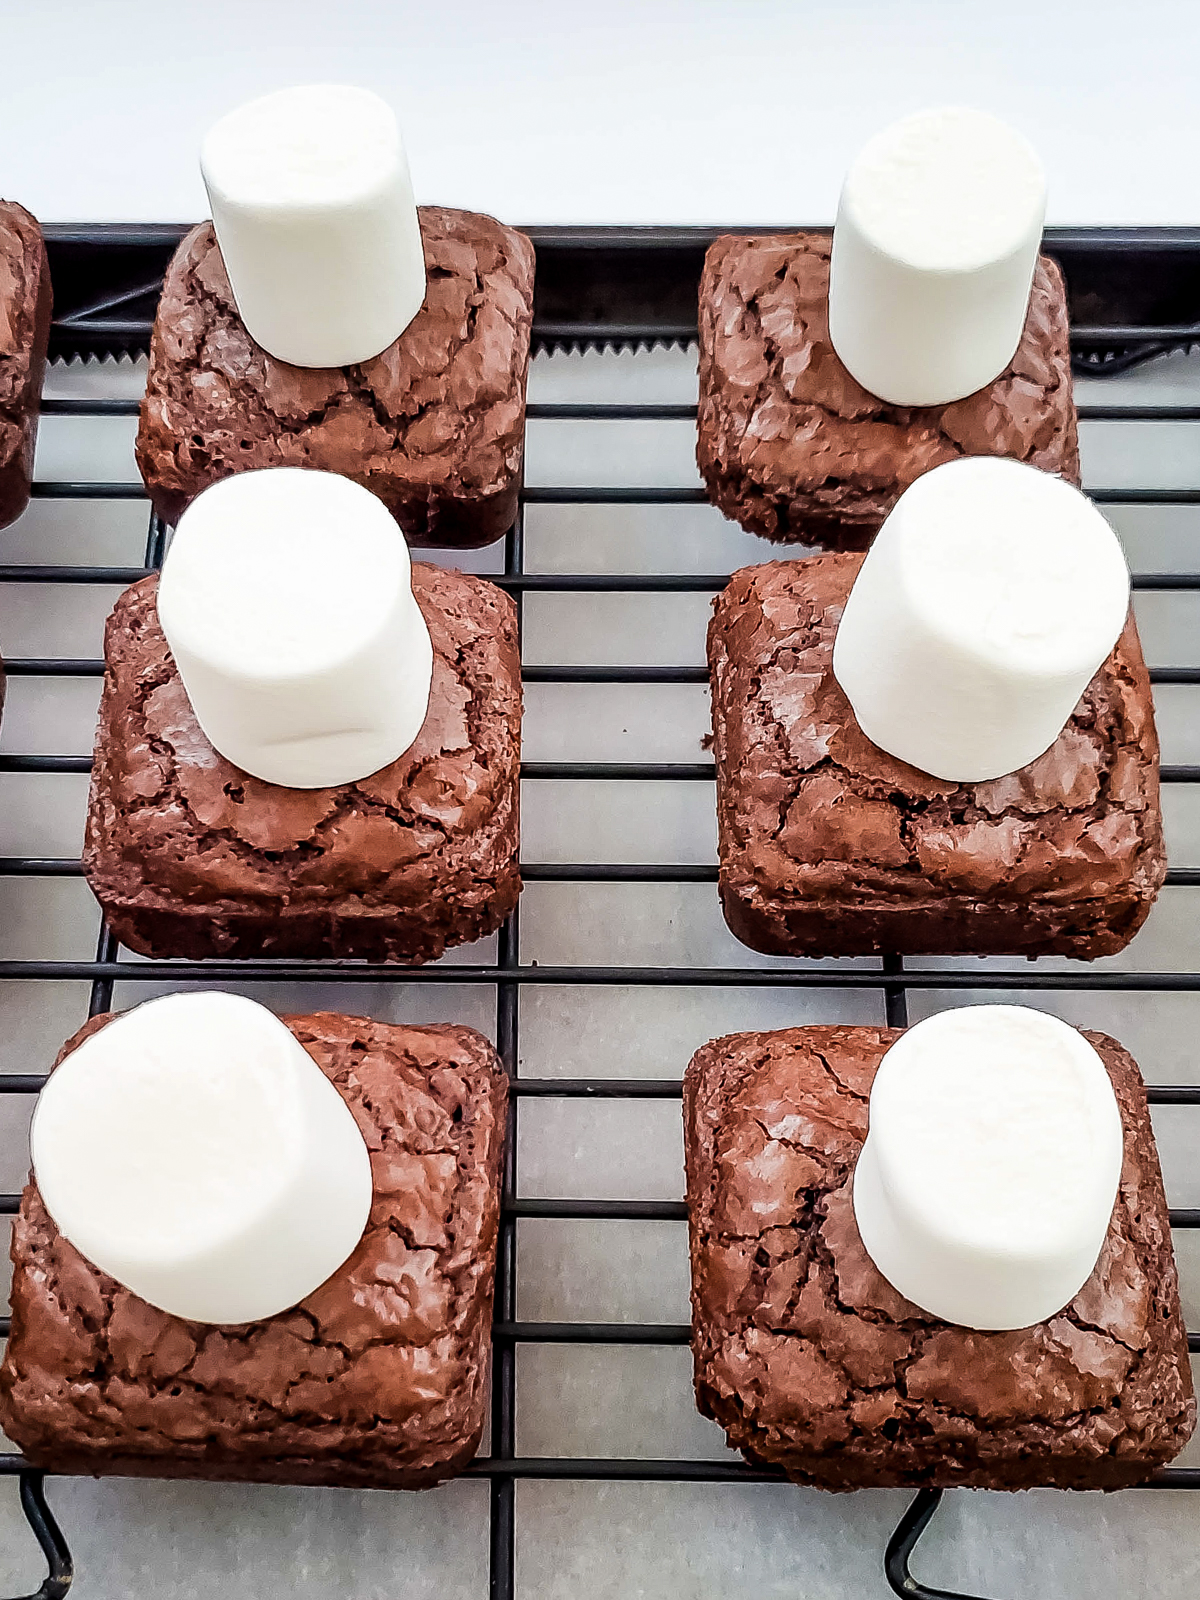 square brownies with a marshmallow on top